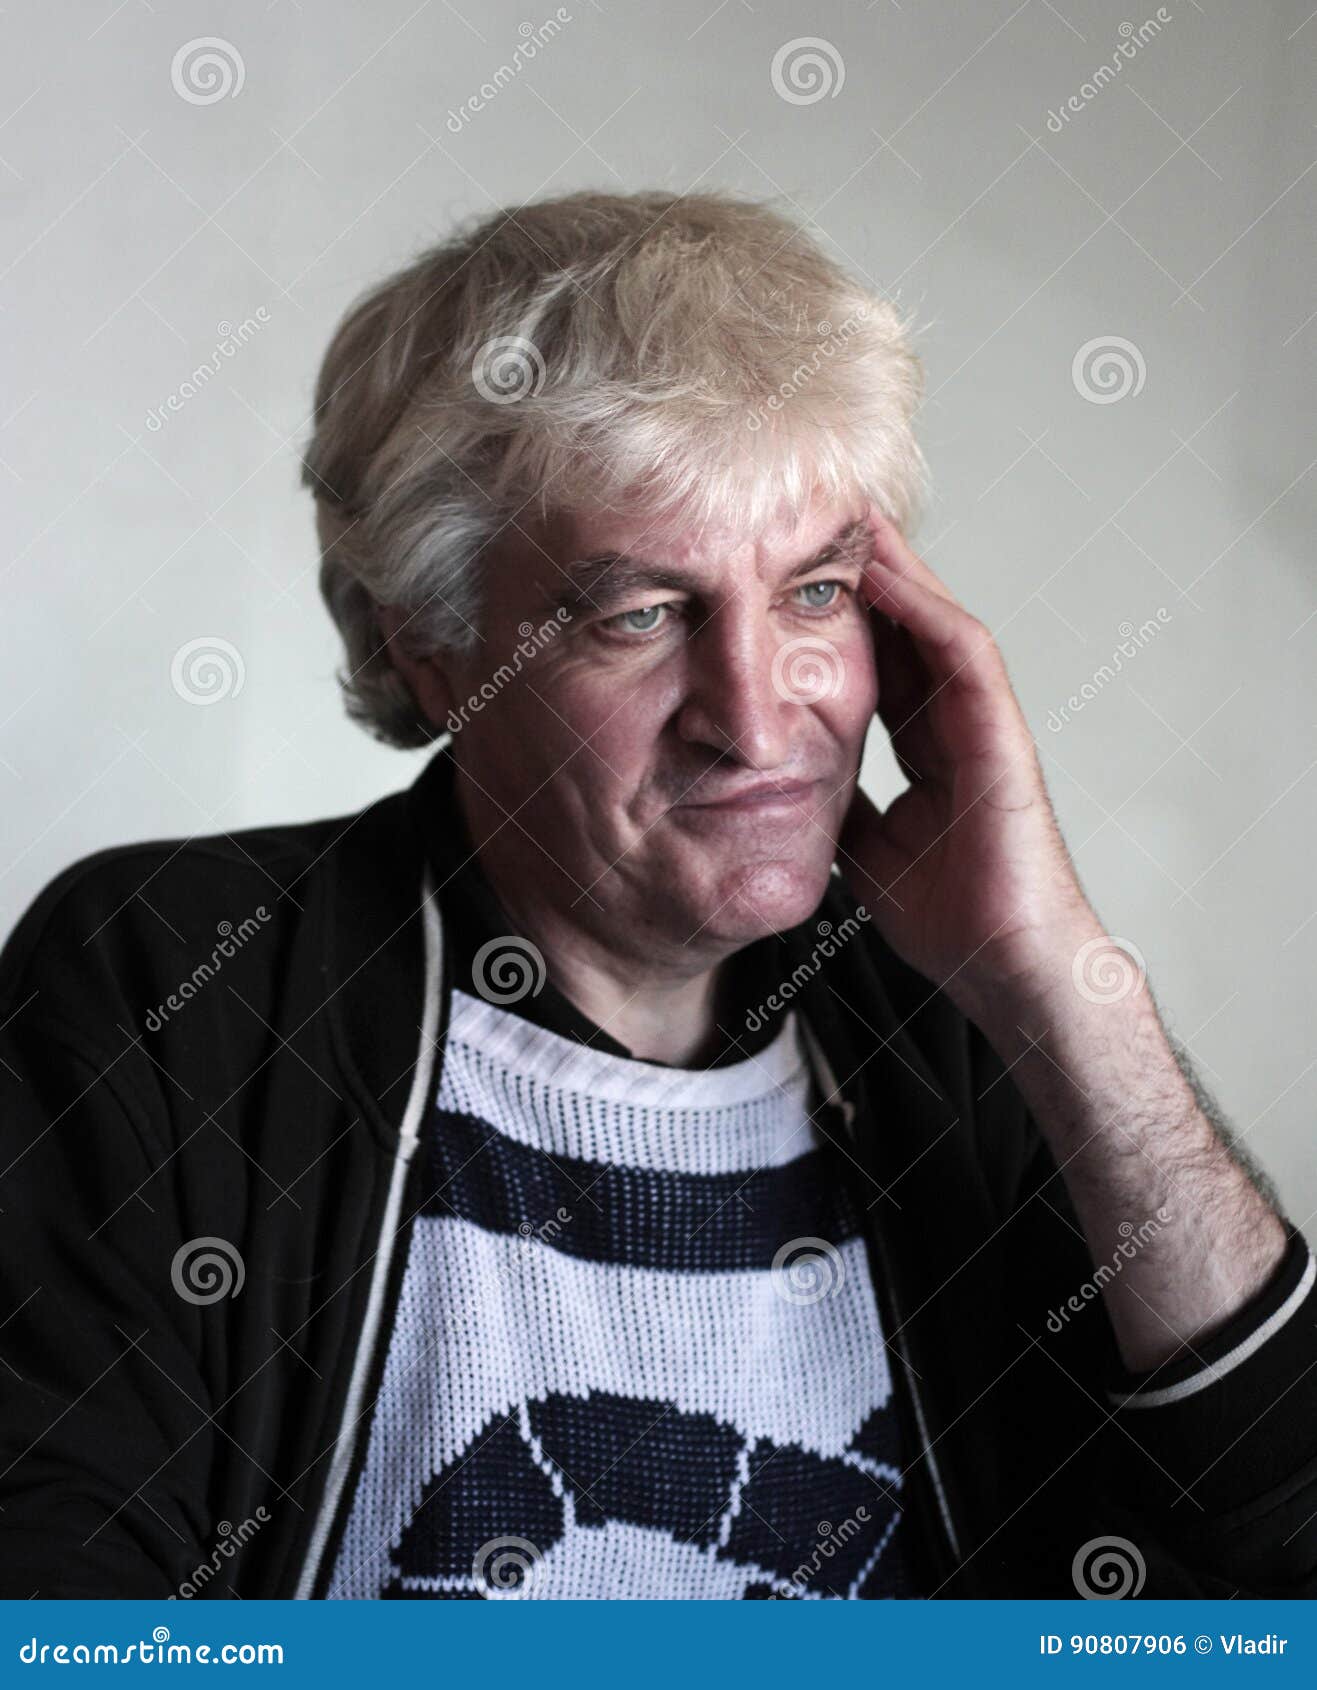 Portrait Man In His 50s With Blond Hair Stock Photo Image Of